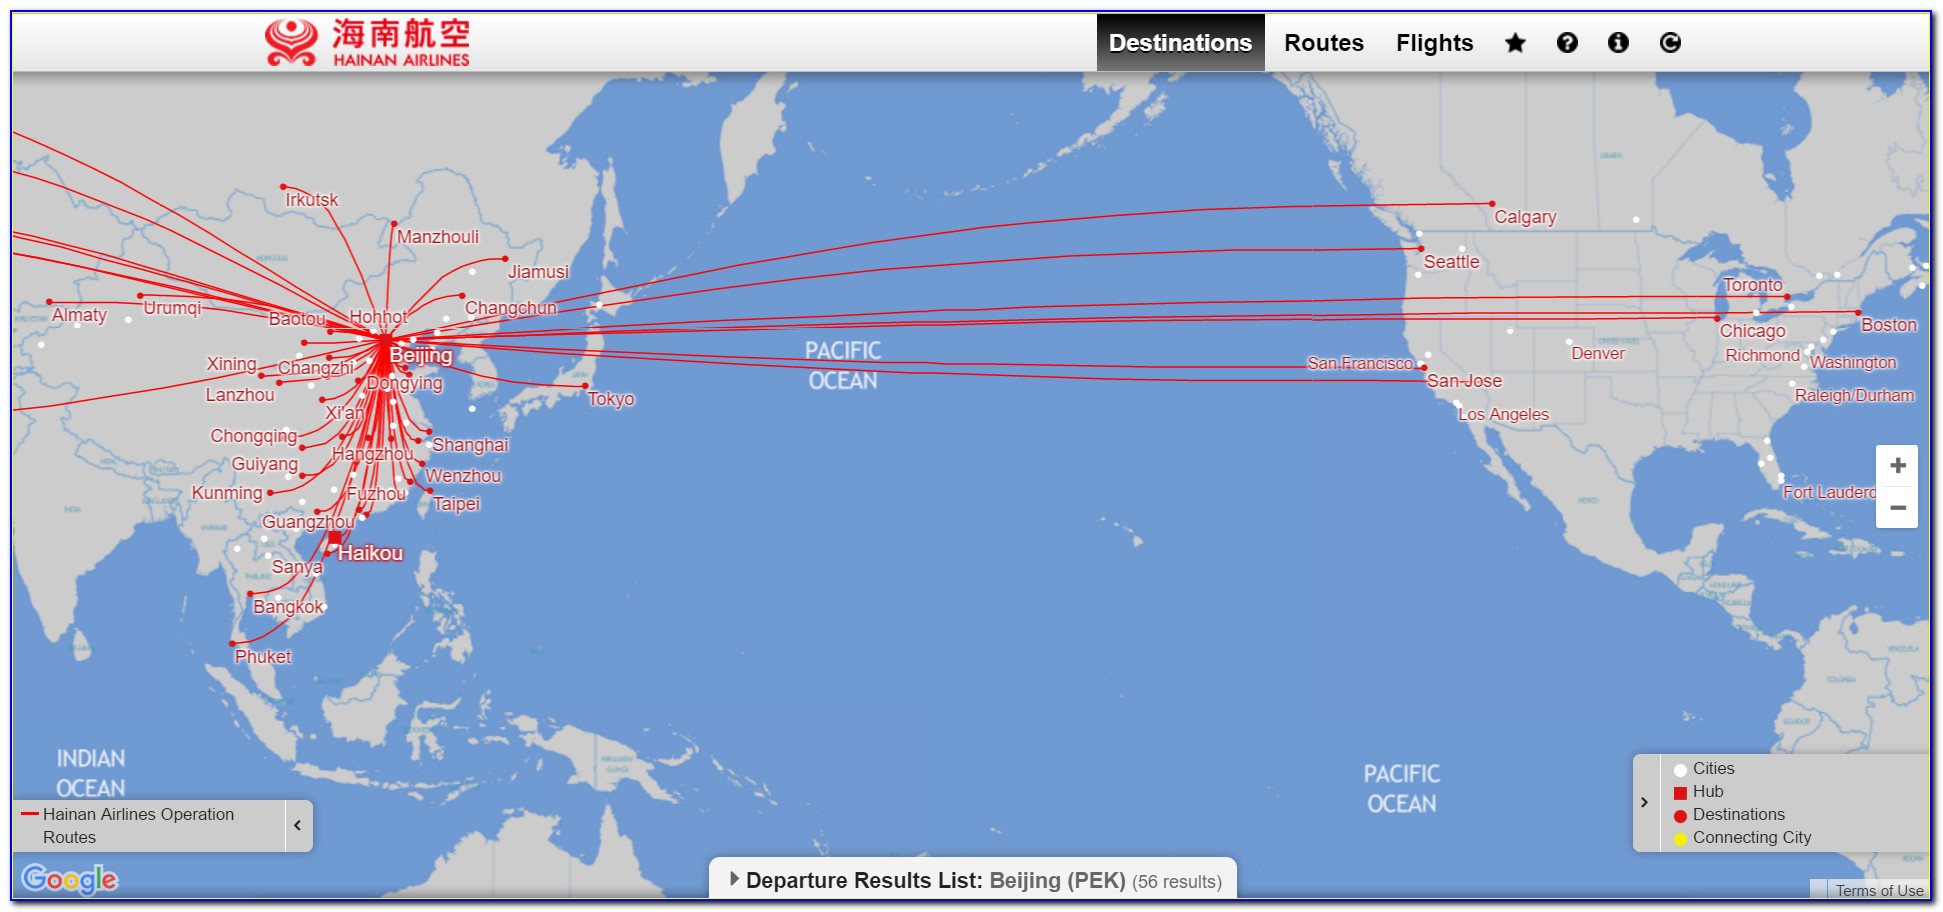 Hainan Airlines Route Map 2019